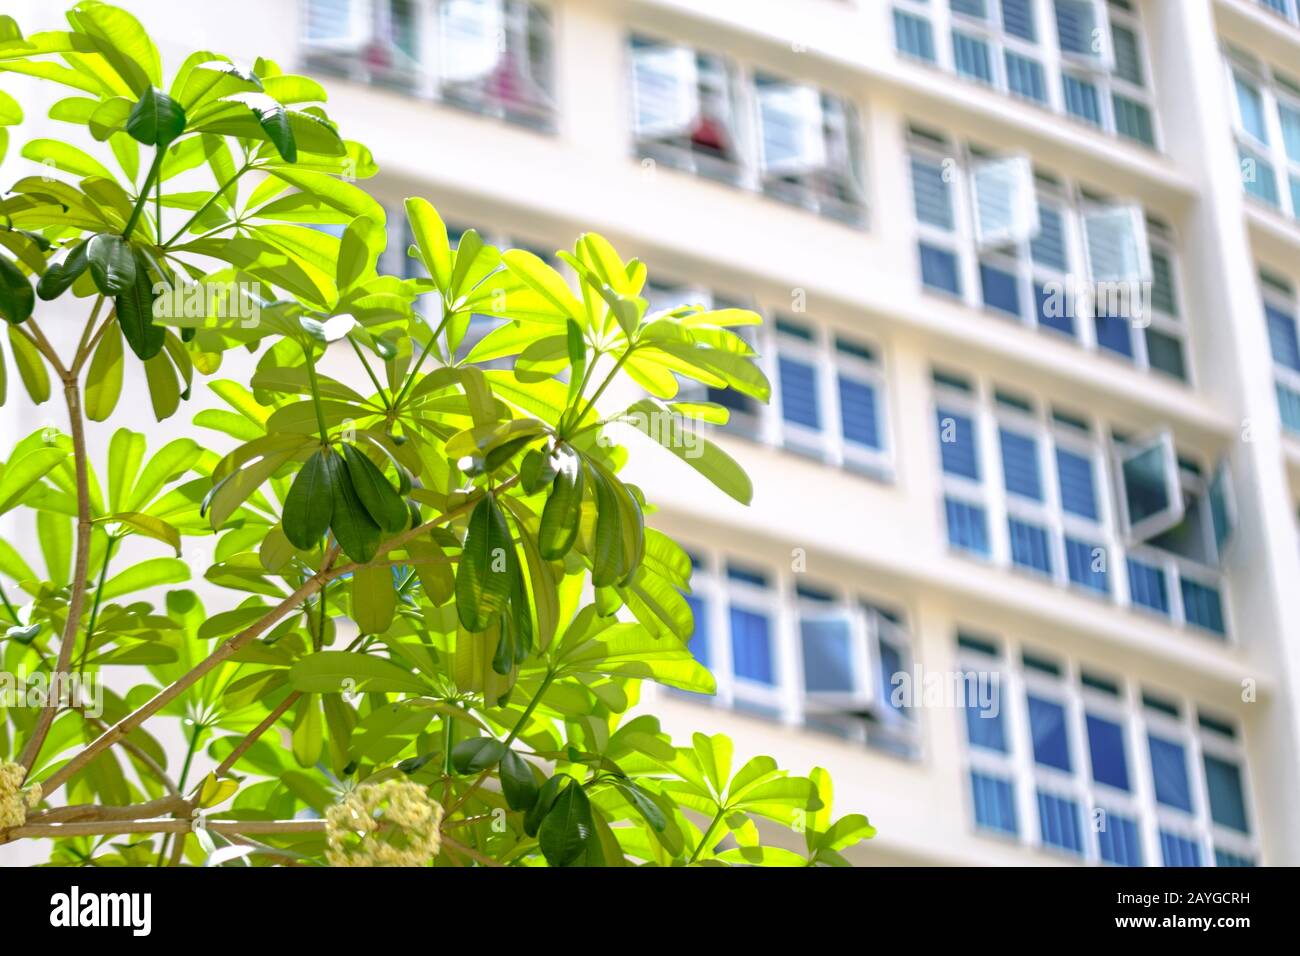 image blur background of green plant decor outside residential building  Stock Photo - Alamy